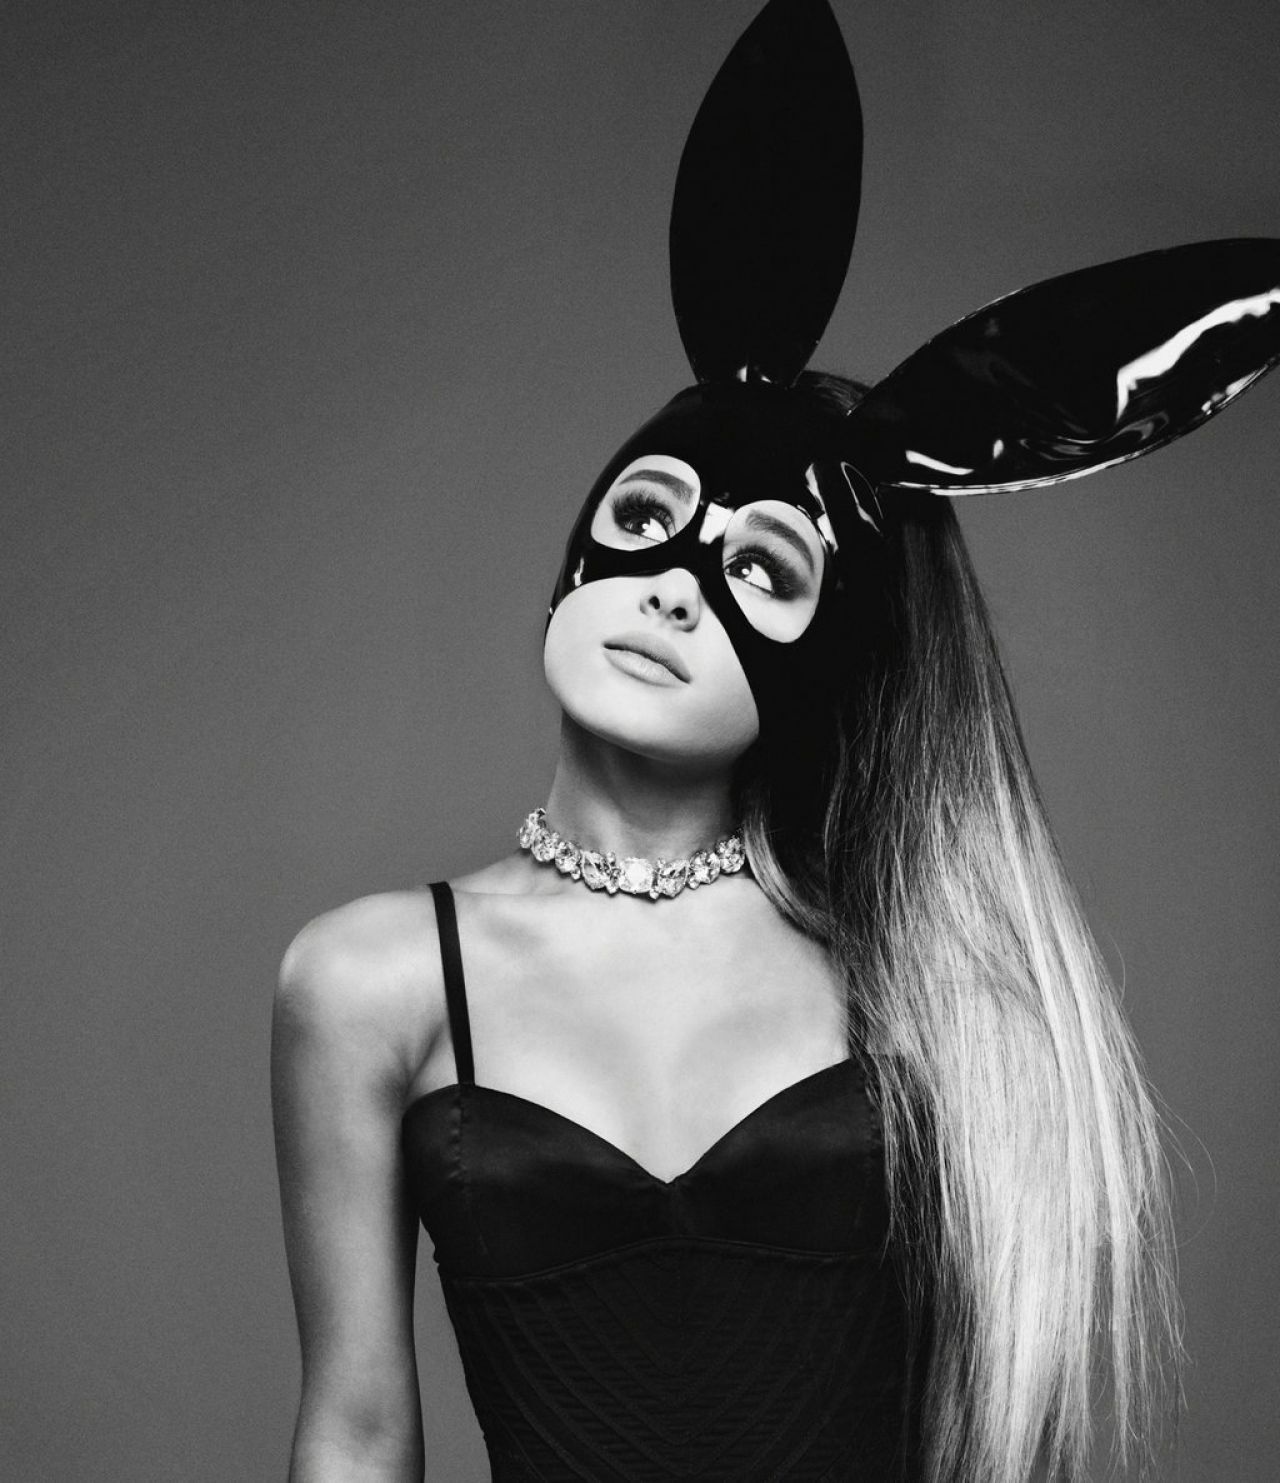 Image result for ariana grande photoshoot dangerous woman